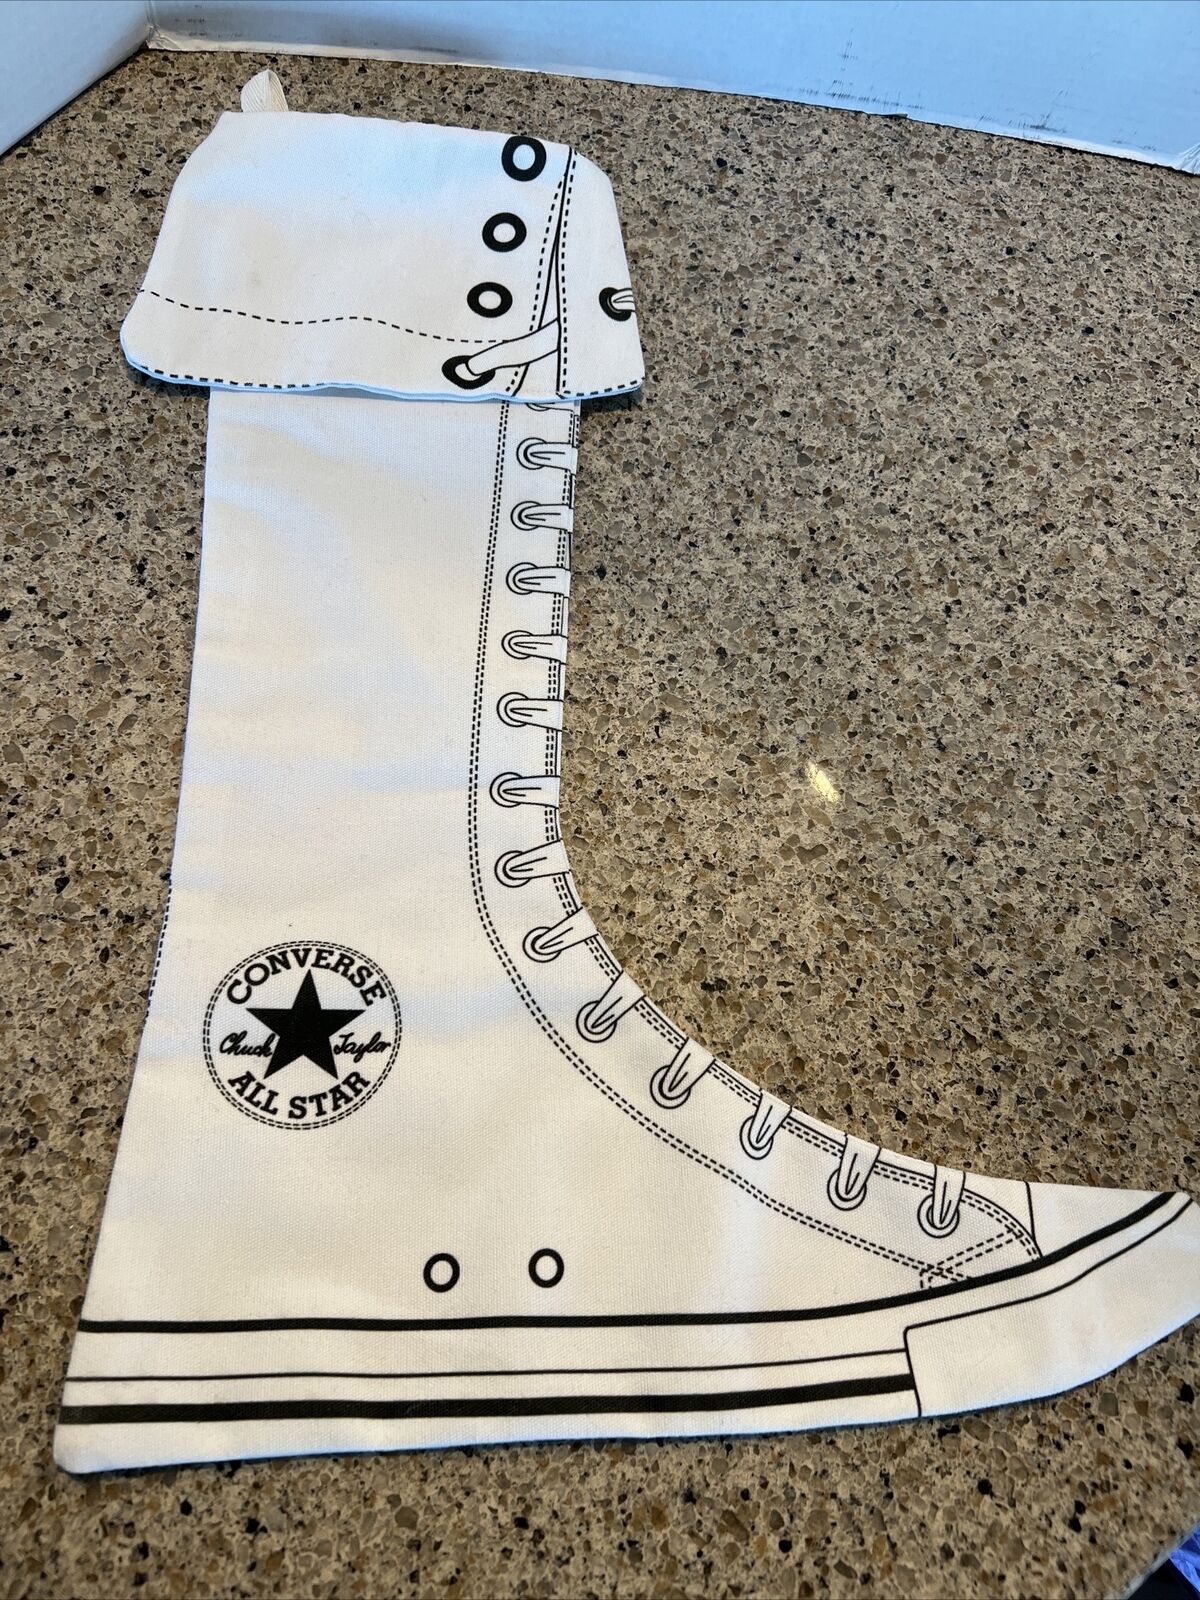 CONVERSE ALL STAR WHITE HIGH TOP Christmas Stocking